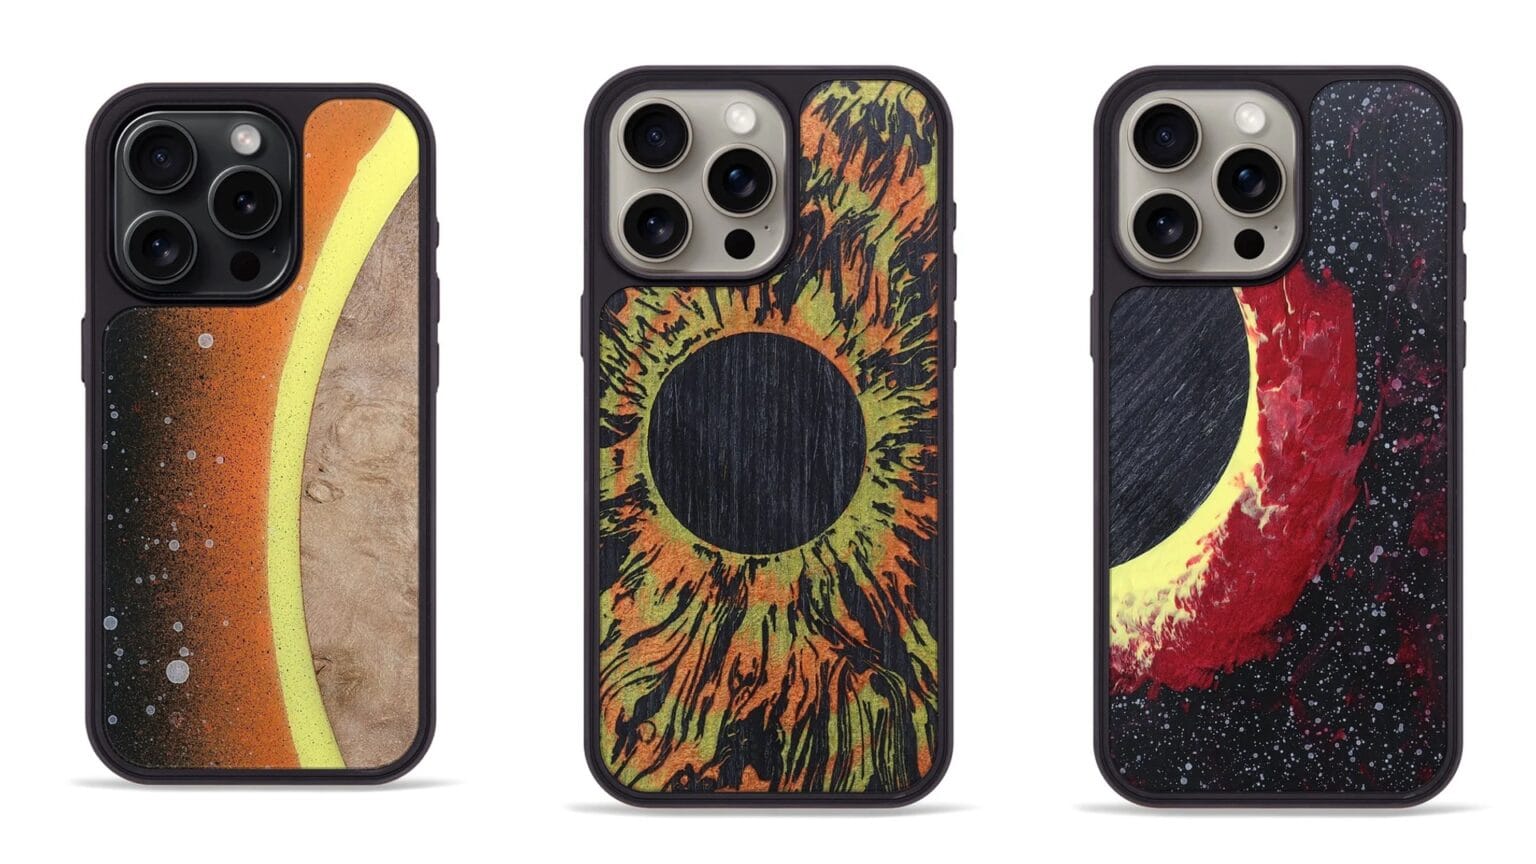 Solar eclipse iPhone cases by Carved